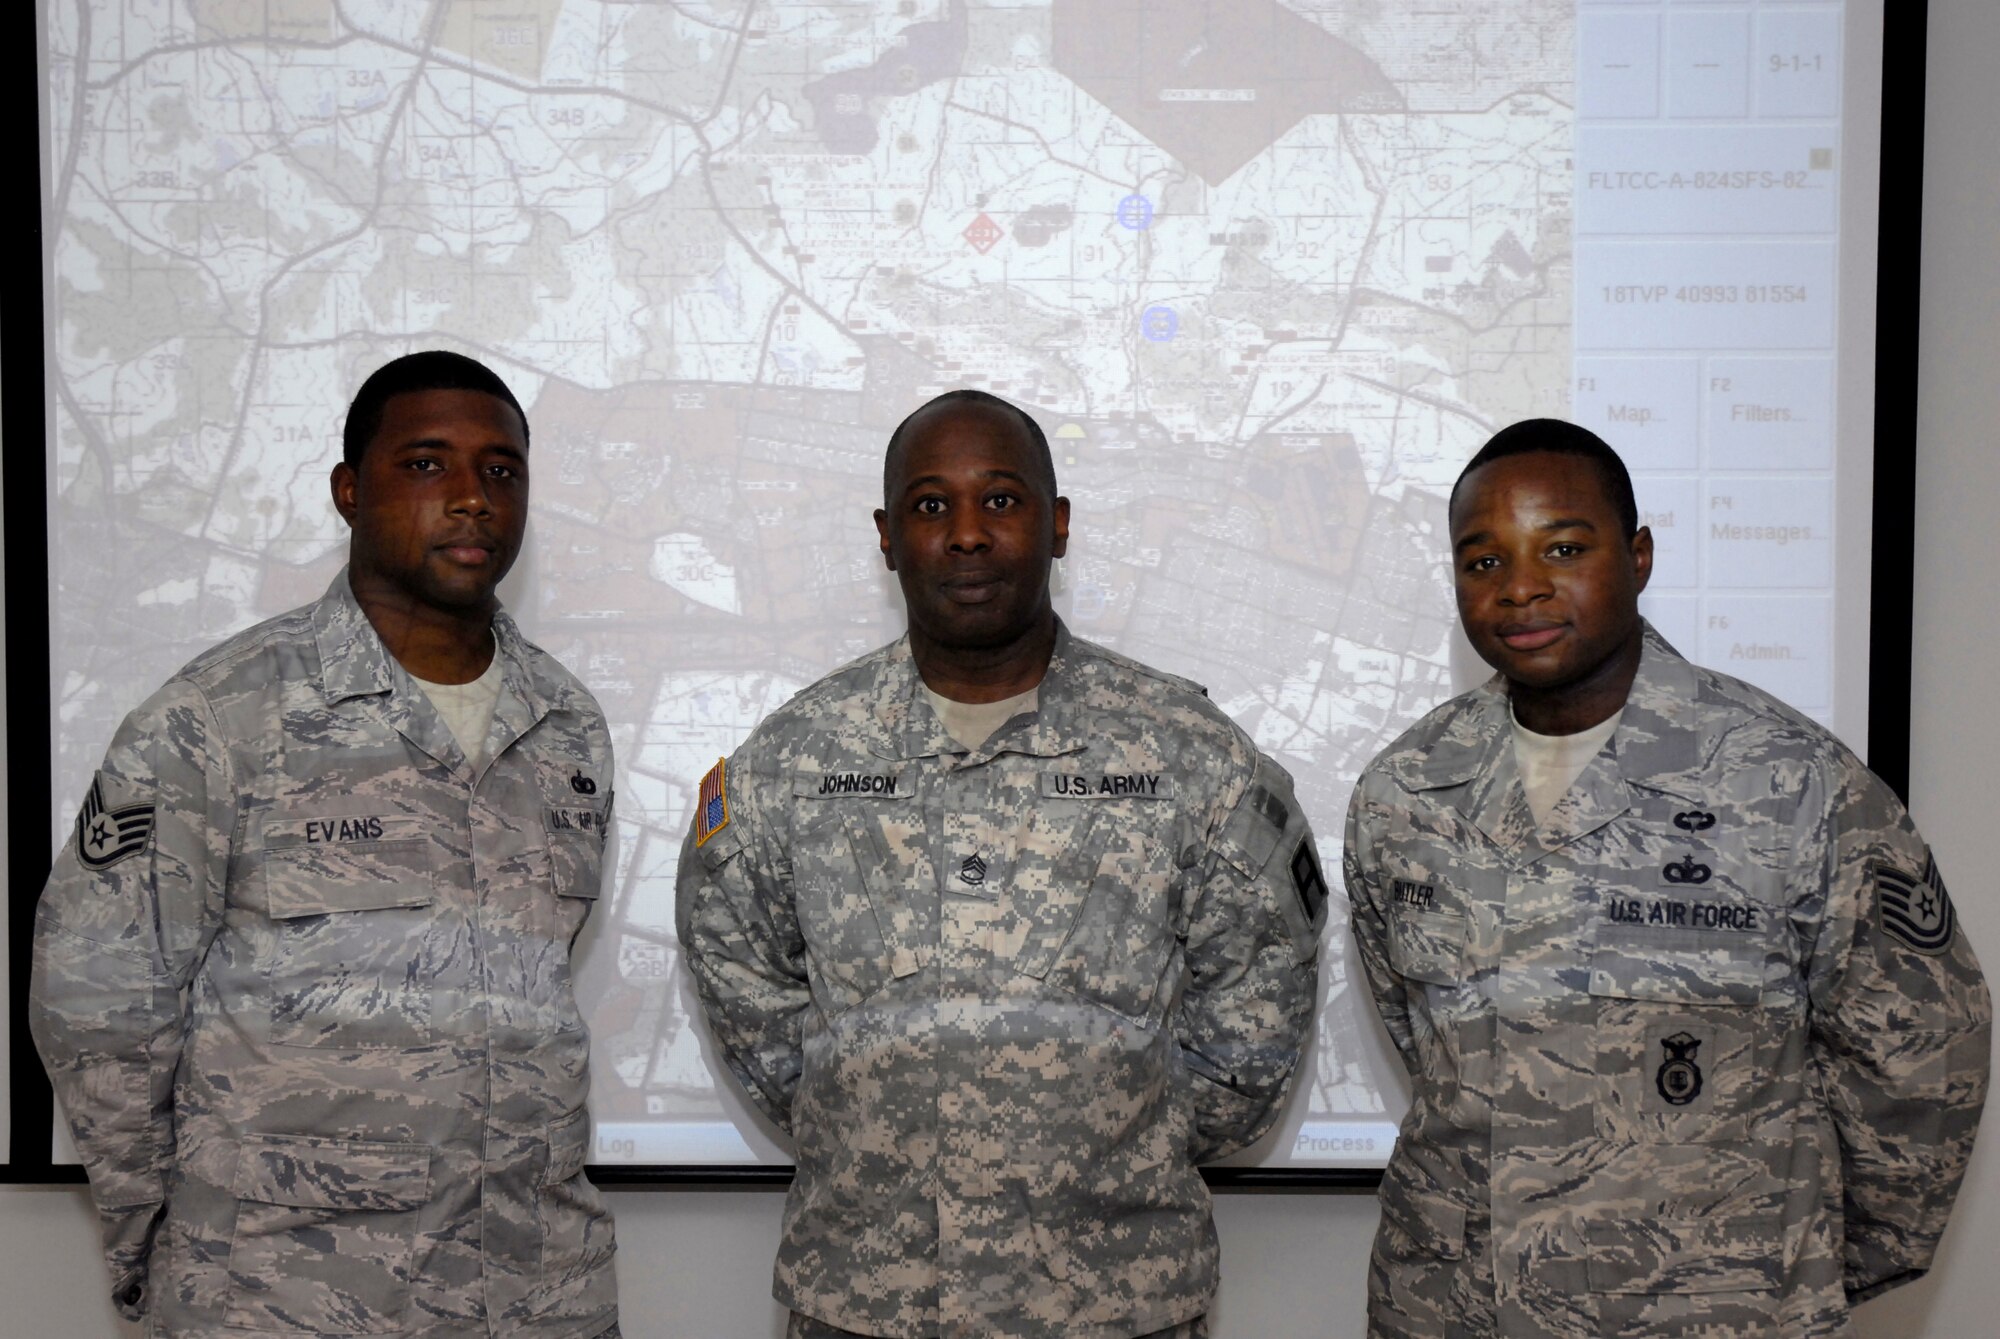 Contingency skills instructors Staff Sgt. Cecil Evans and Tech. Sgt. Shaylin Butler from the 421st Combat Training Squadron partner with U.S. Army Sgt. 1st Class Gary Johnson from the 3rd Training Support Battalion at Fort Meade, Md., to spearhead the creation of an Air Force program allowing Airmen to train Airmen in Blue Force Tracker at the U.S. Air Force Expeditionary Center, Fort Dix, N.J.  August 29, 2009.  Having Airmen training Airmen helps alleviate some of the demand placed on the Army by reducing the Air Force's demand for their training. (U.S. Air Force Photo/Tech. Sgt. Paul R. Evans)